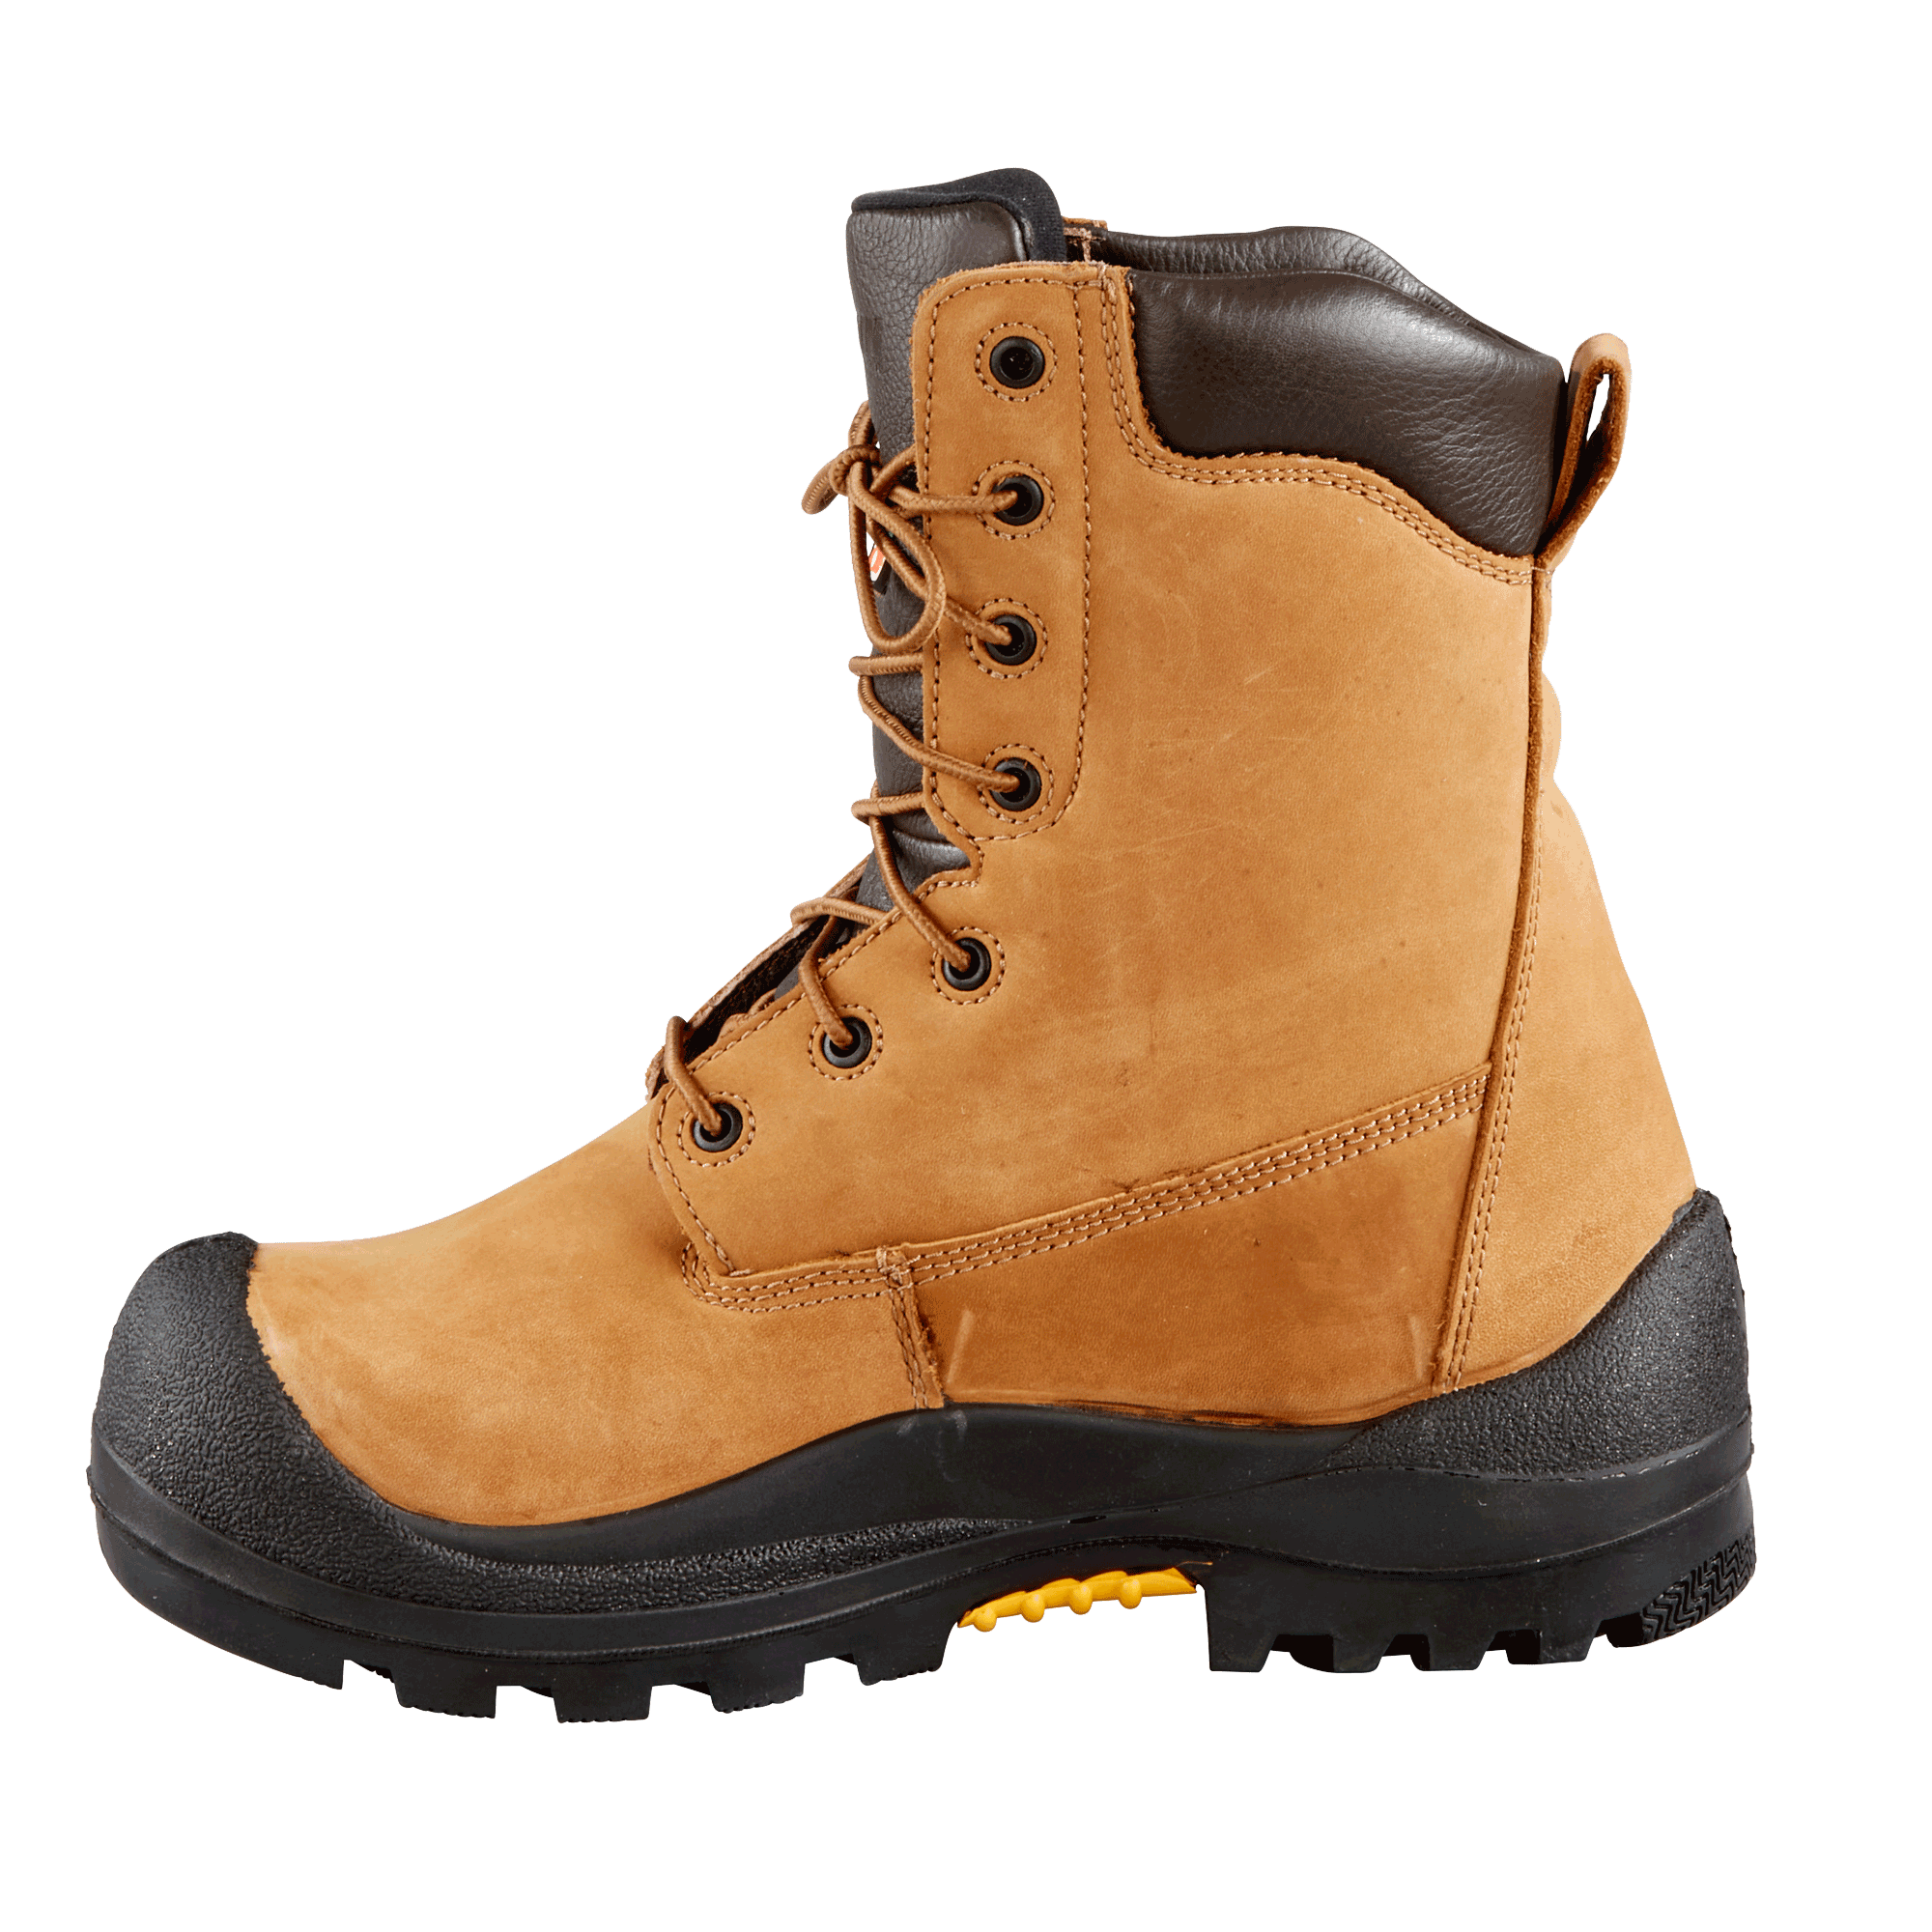 CLASSIC 8" (Safety Toe & Plate) | Men's Boot